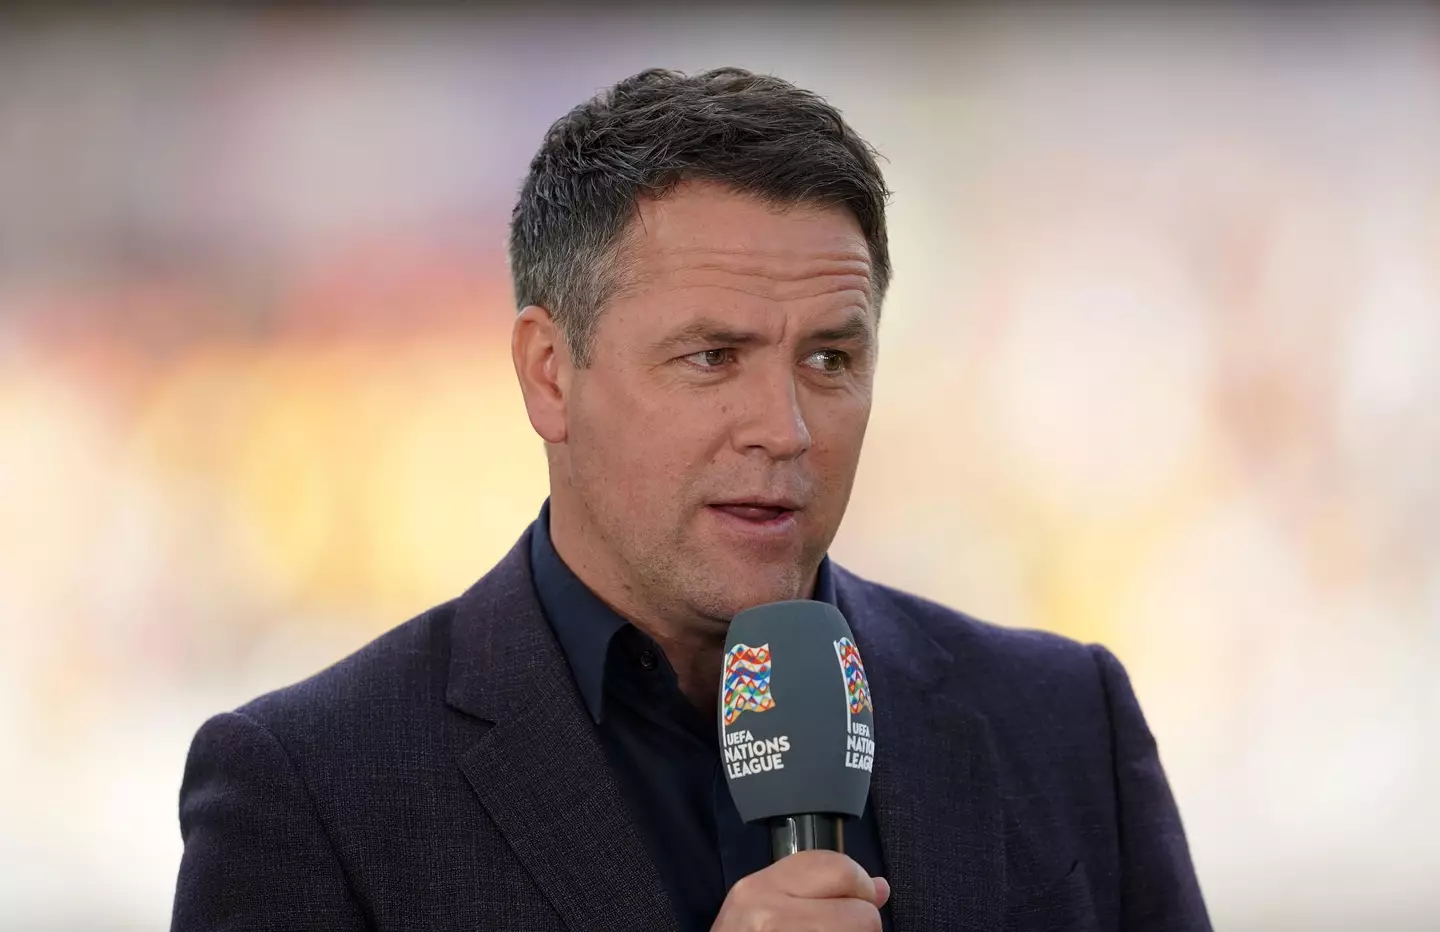 Michael Owen has confirmed that he will not be taking part in the show.